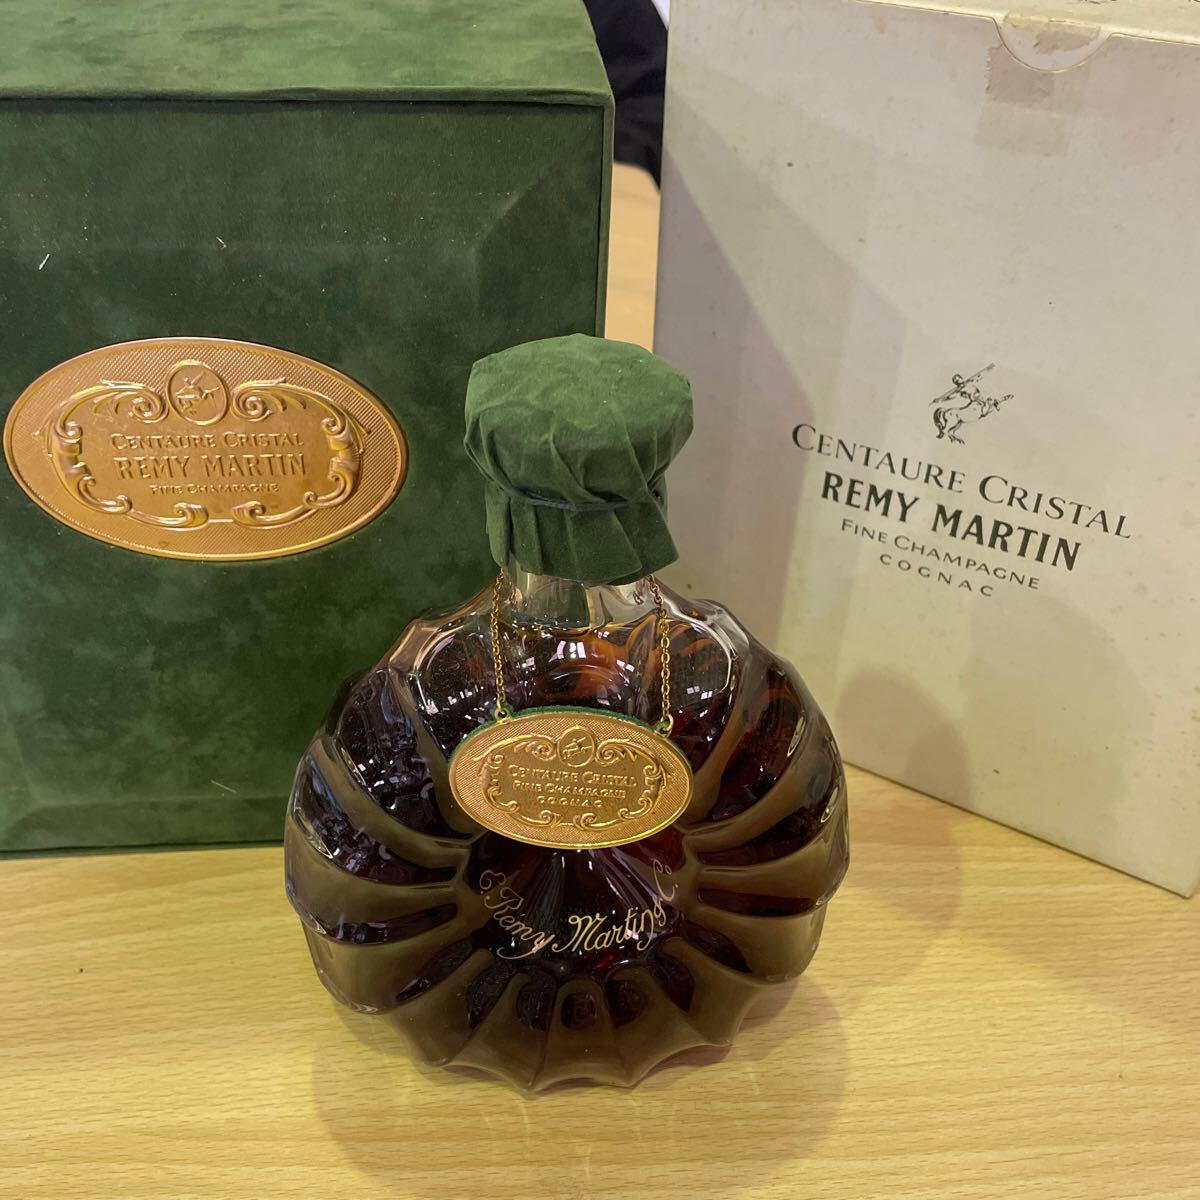 .170 1 jpy start REMY MARTIN Remy Martin cent - crystal cognac baccarat 700ml frequency not yet chronicle not yet . plug 